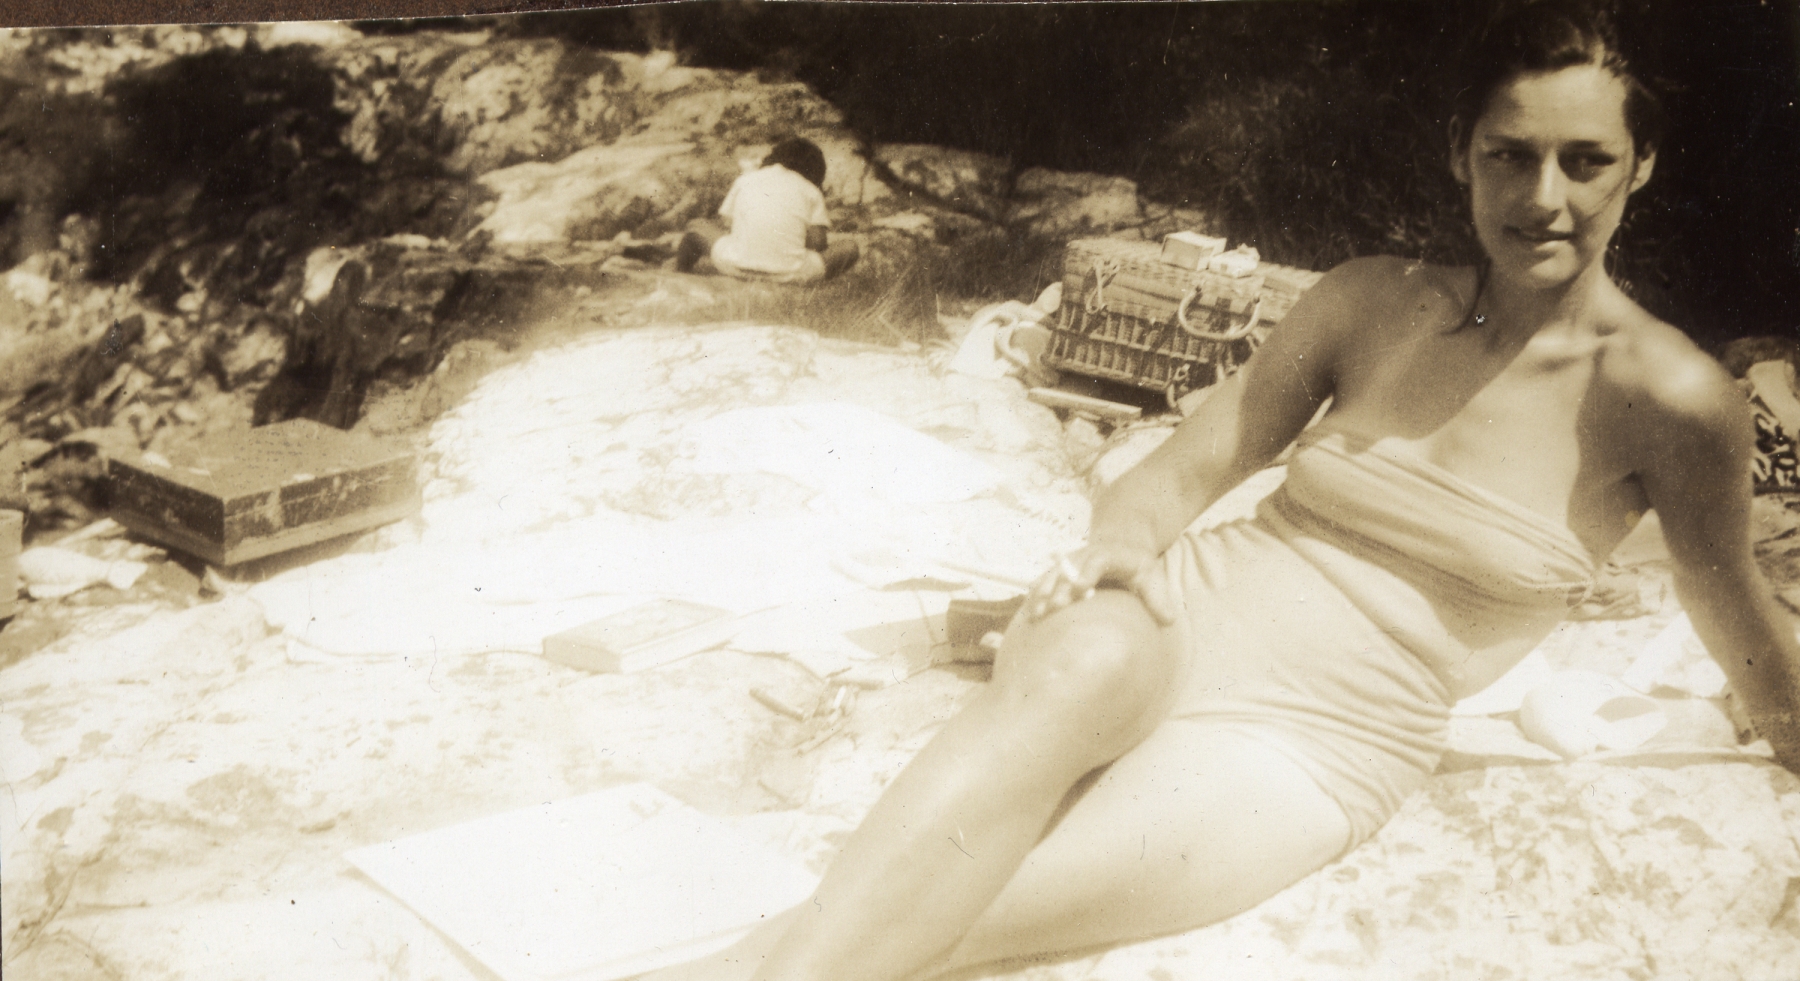 Woman in a bathing suit with her hair wet reclining on a rocky beach, in the distance are a suitcase, wicker basket, and a seated young child seen from behind